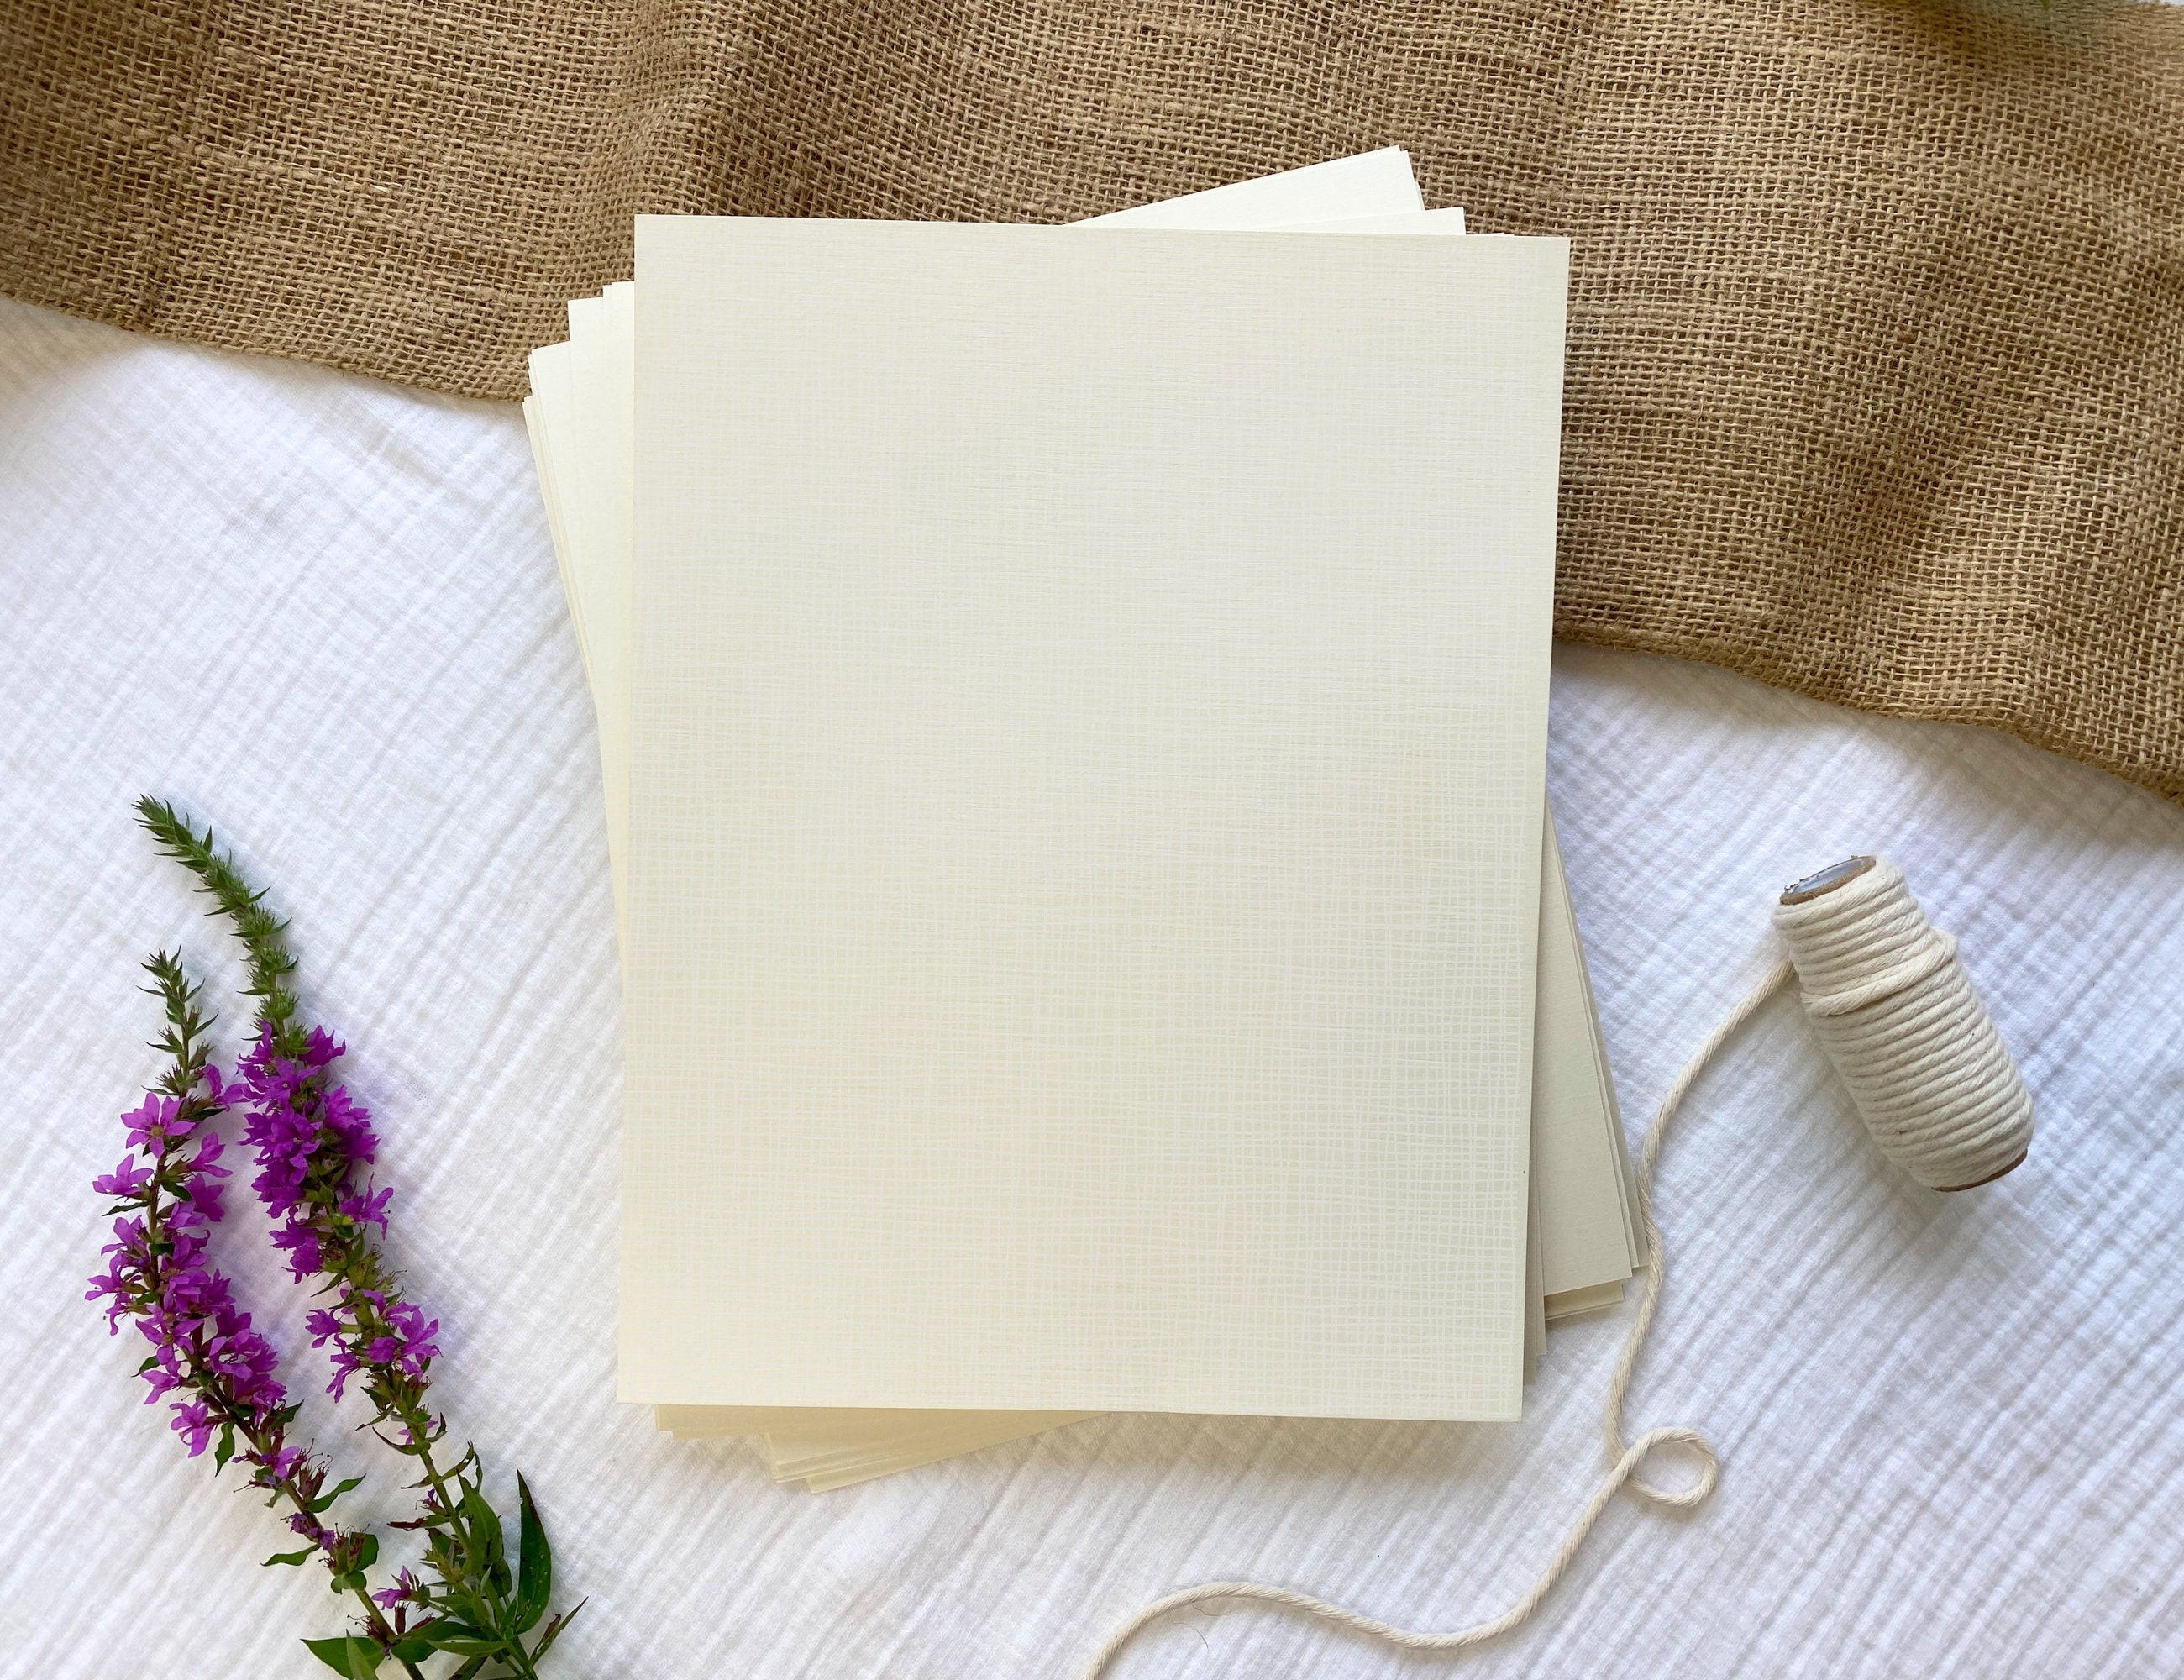 White 8.5 x 11 Cardstock - Blank SUPER Thick Paper - 50 Sheets - Artist  Drawing Quality Eggshell Finish - Heavy Weight 120lb Cover Card Stock for